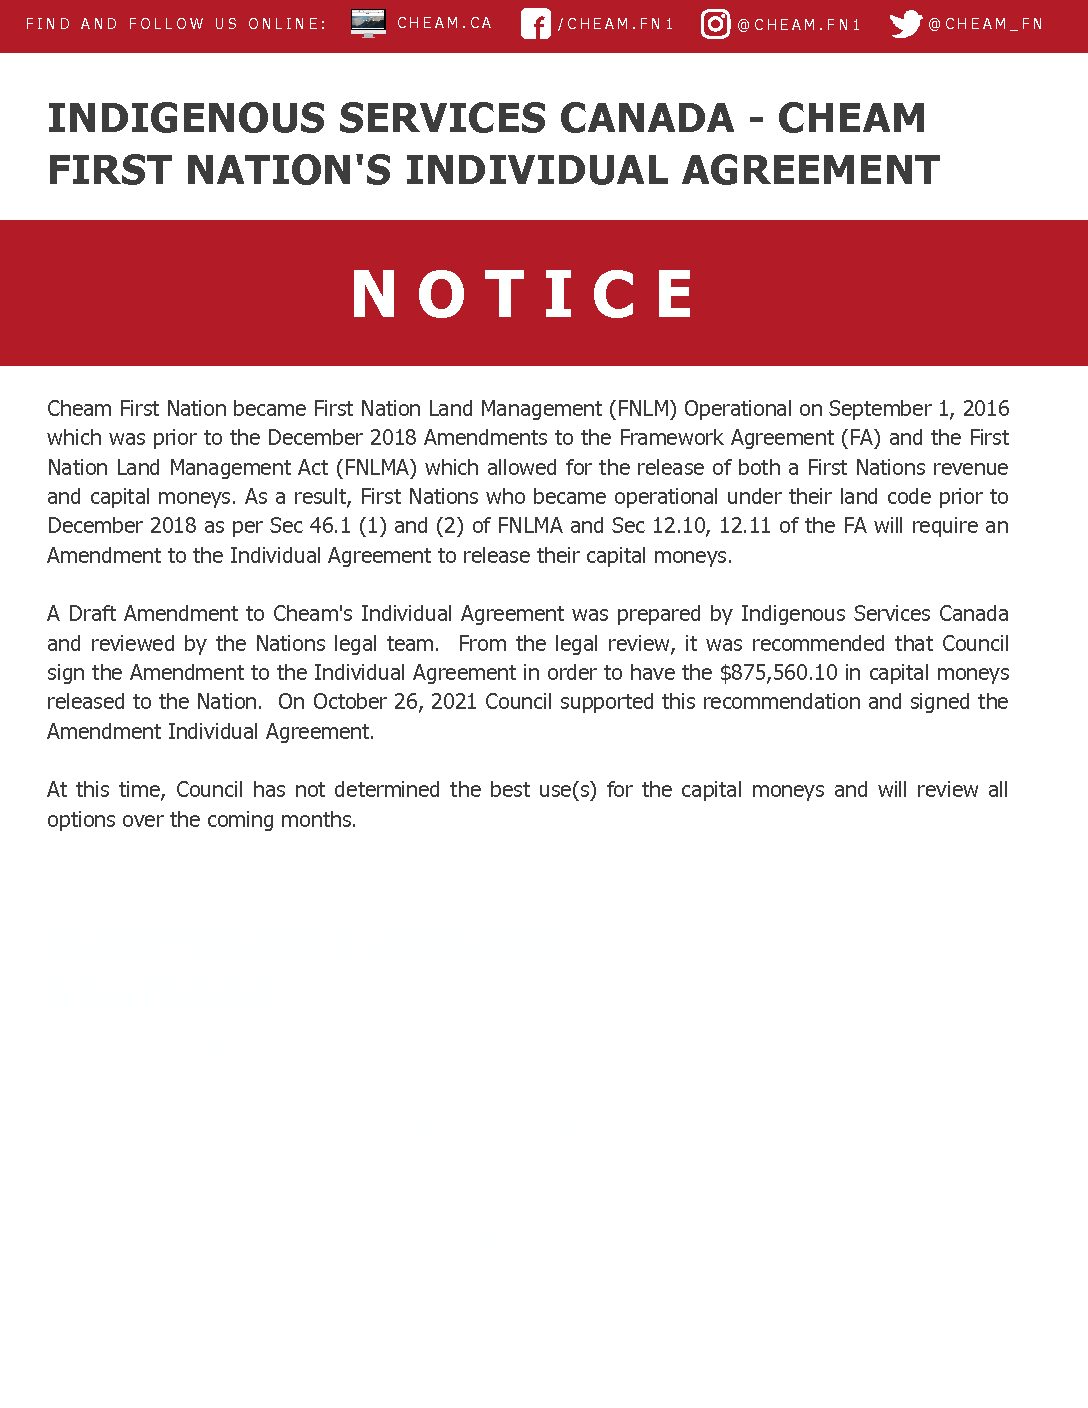 Notice – ISC – Cheam First Nation’s Individual Agreement